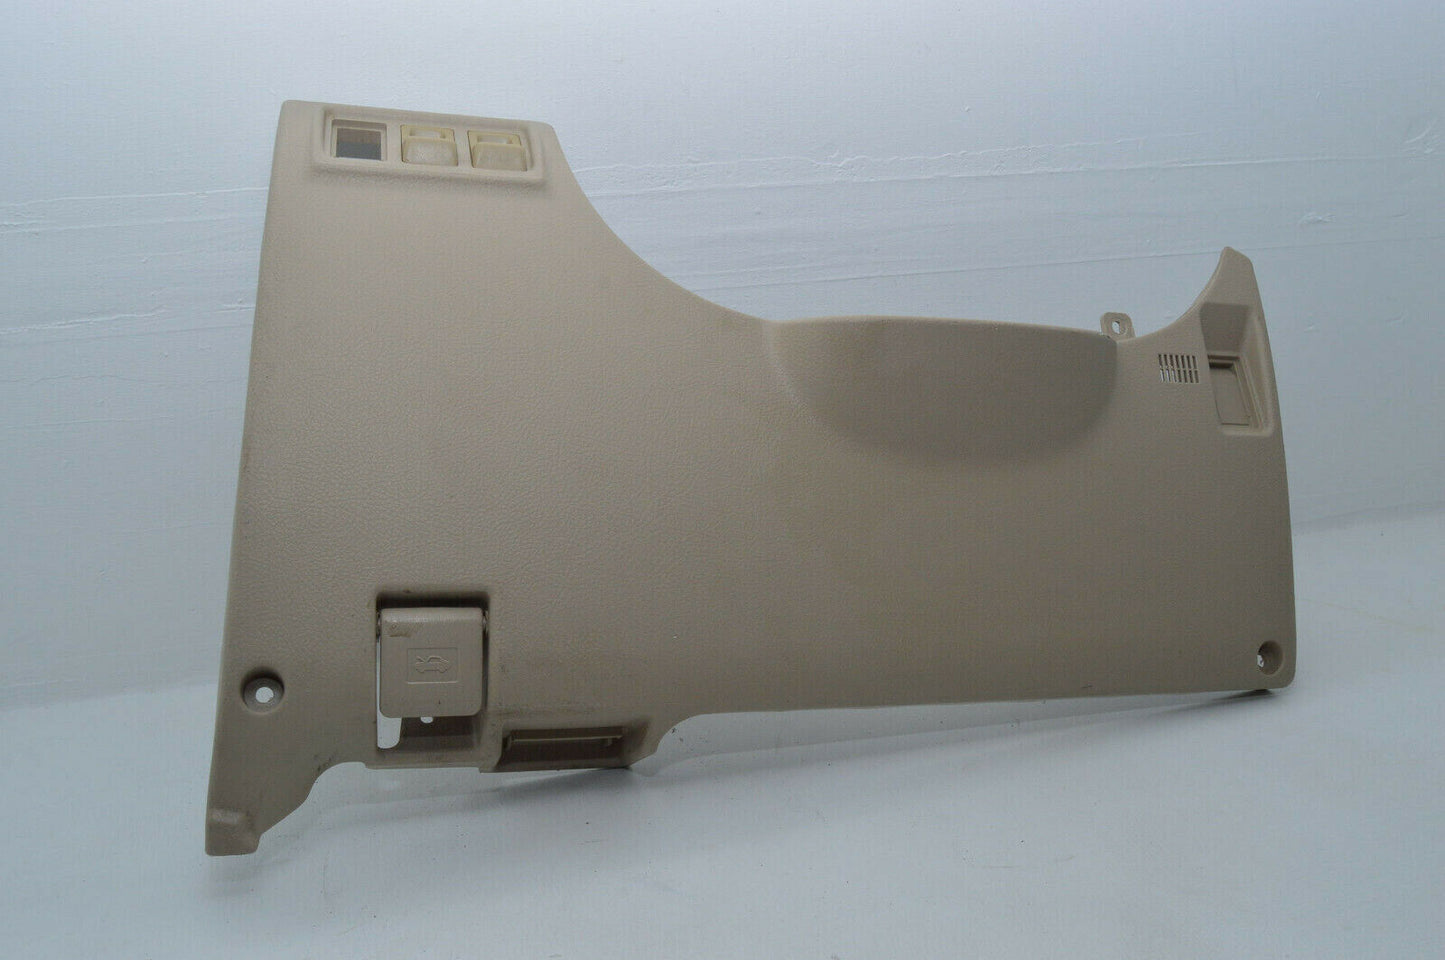 01-05 Lexus Is300 Driver Knee Panel with Hood Latch Ivory 55045-53020-A0 Oem Used